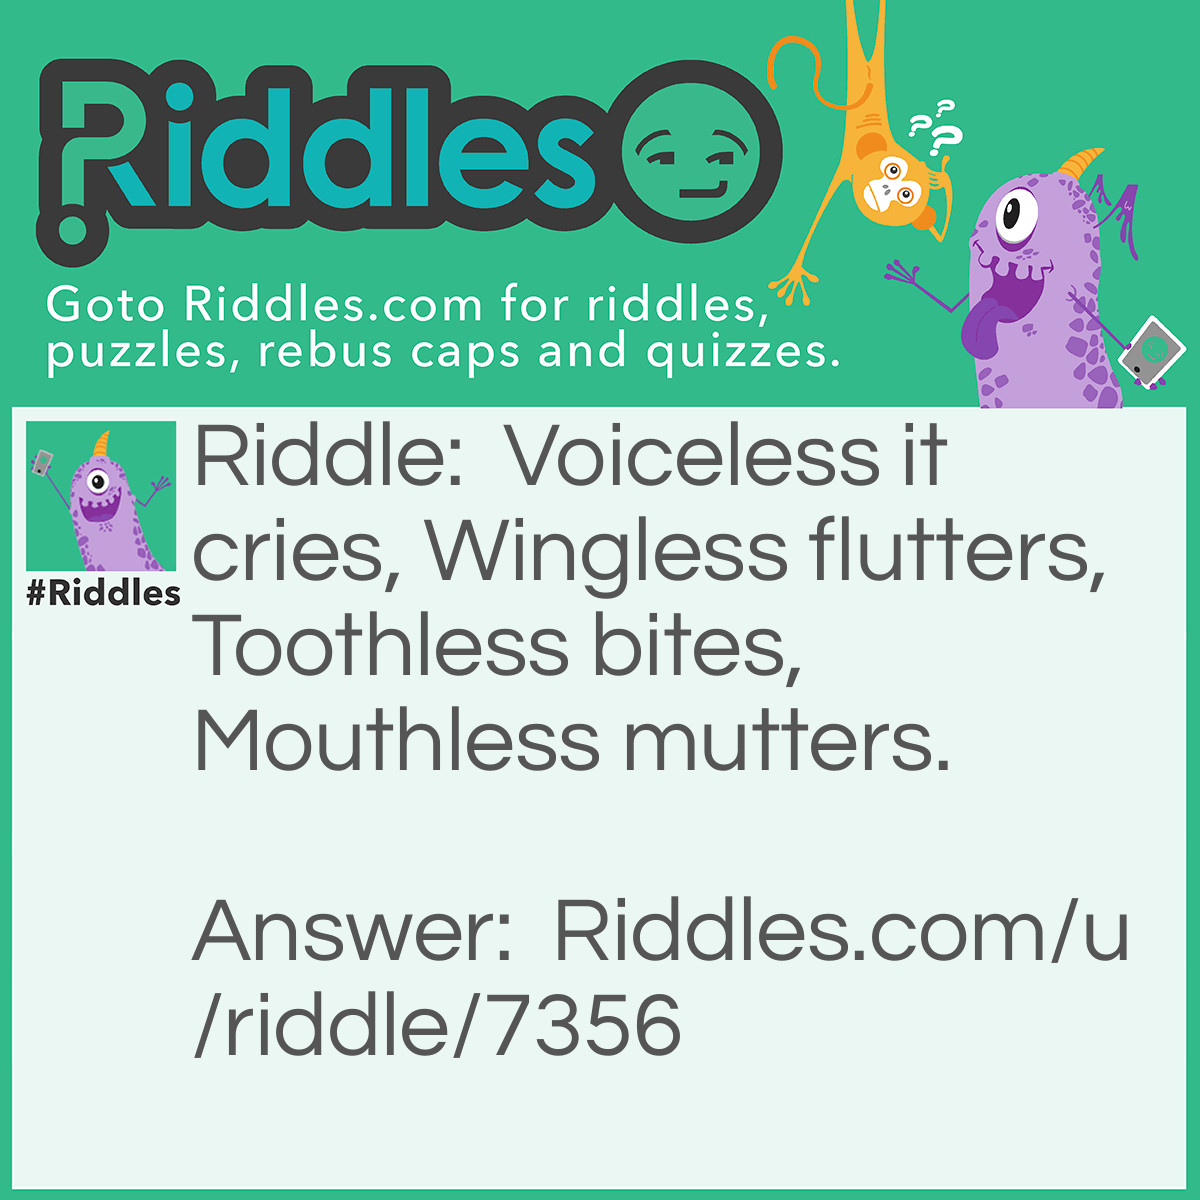 Riddle: Voiceless it cries, Wingless flutters, Toothless bites, Mouthless mutters. What is it? Answer: Wind.